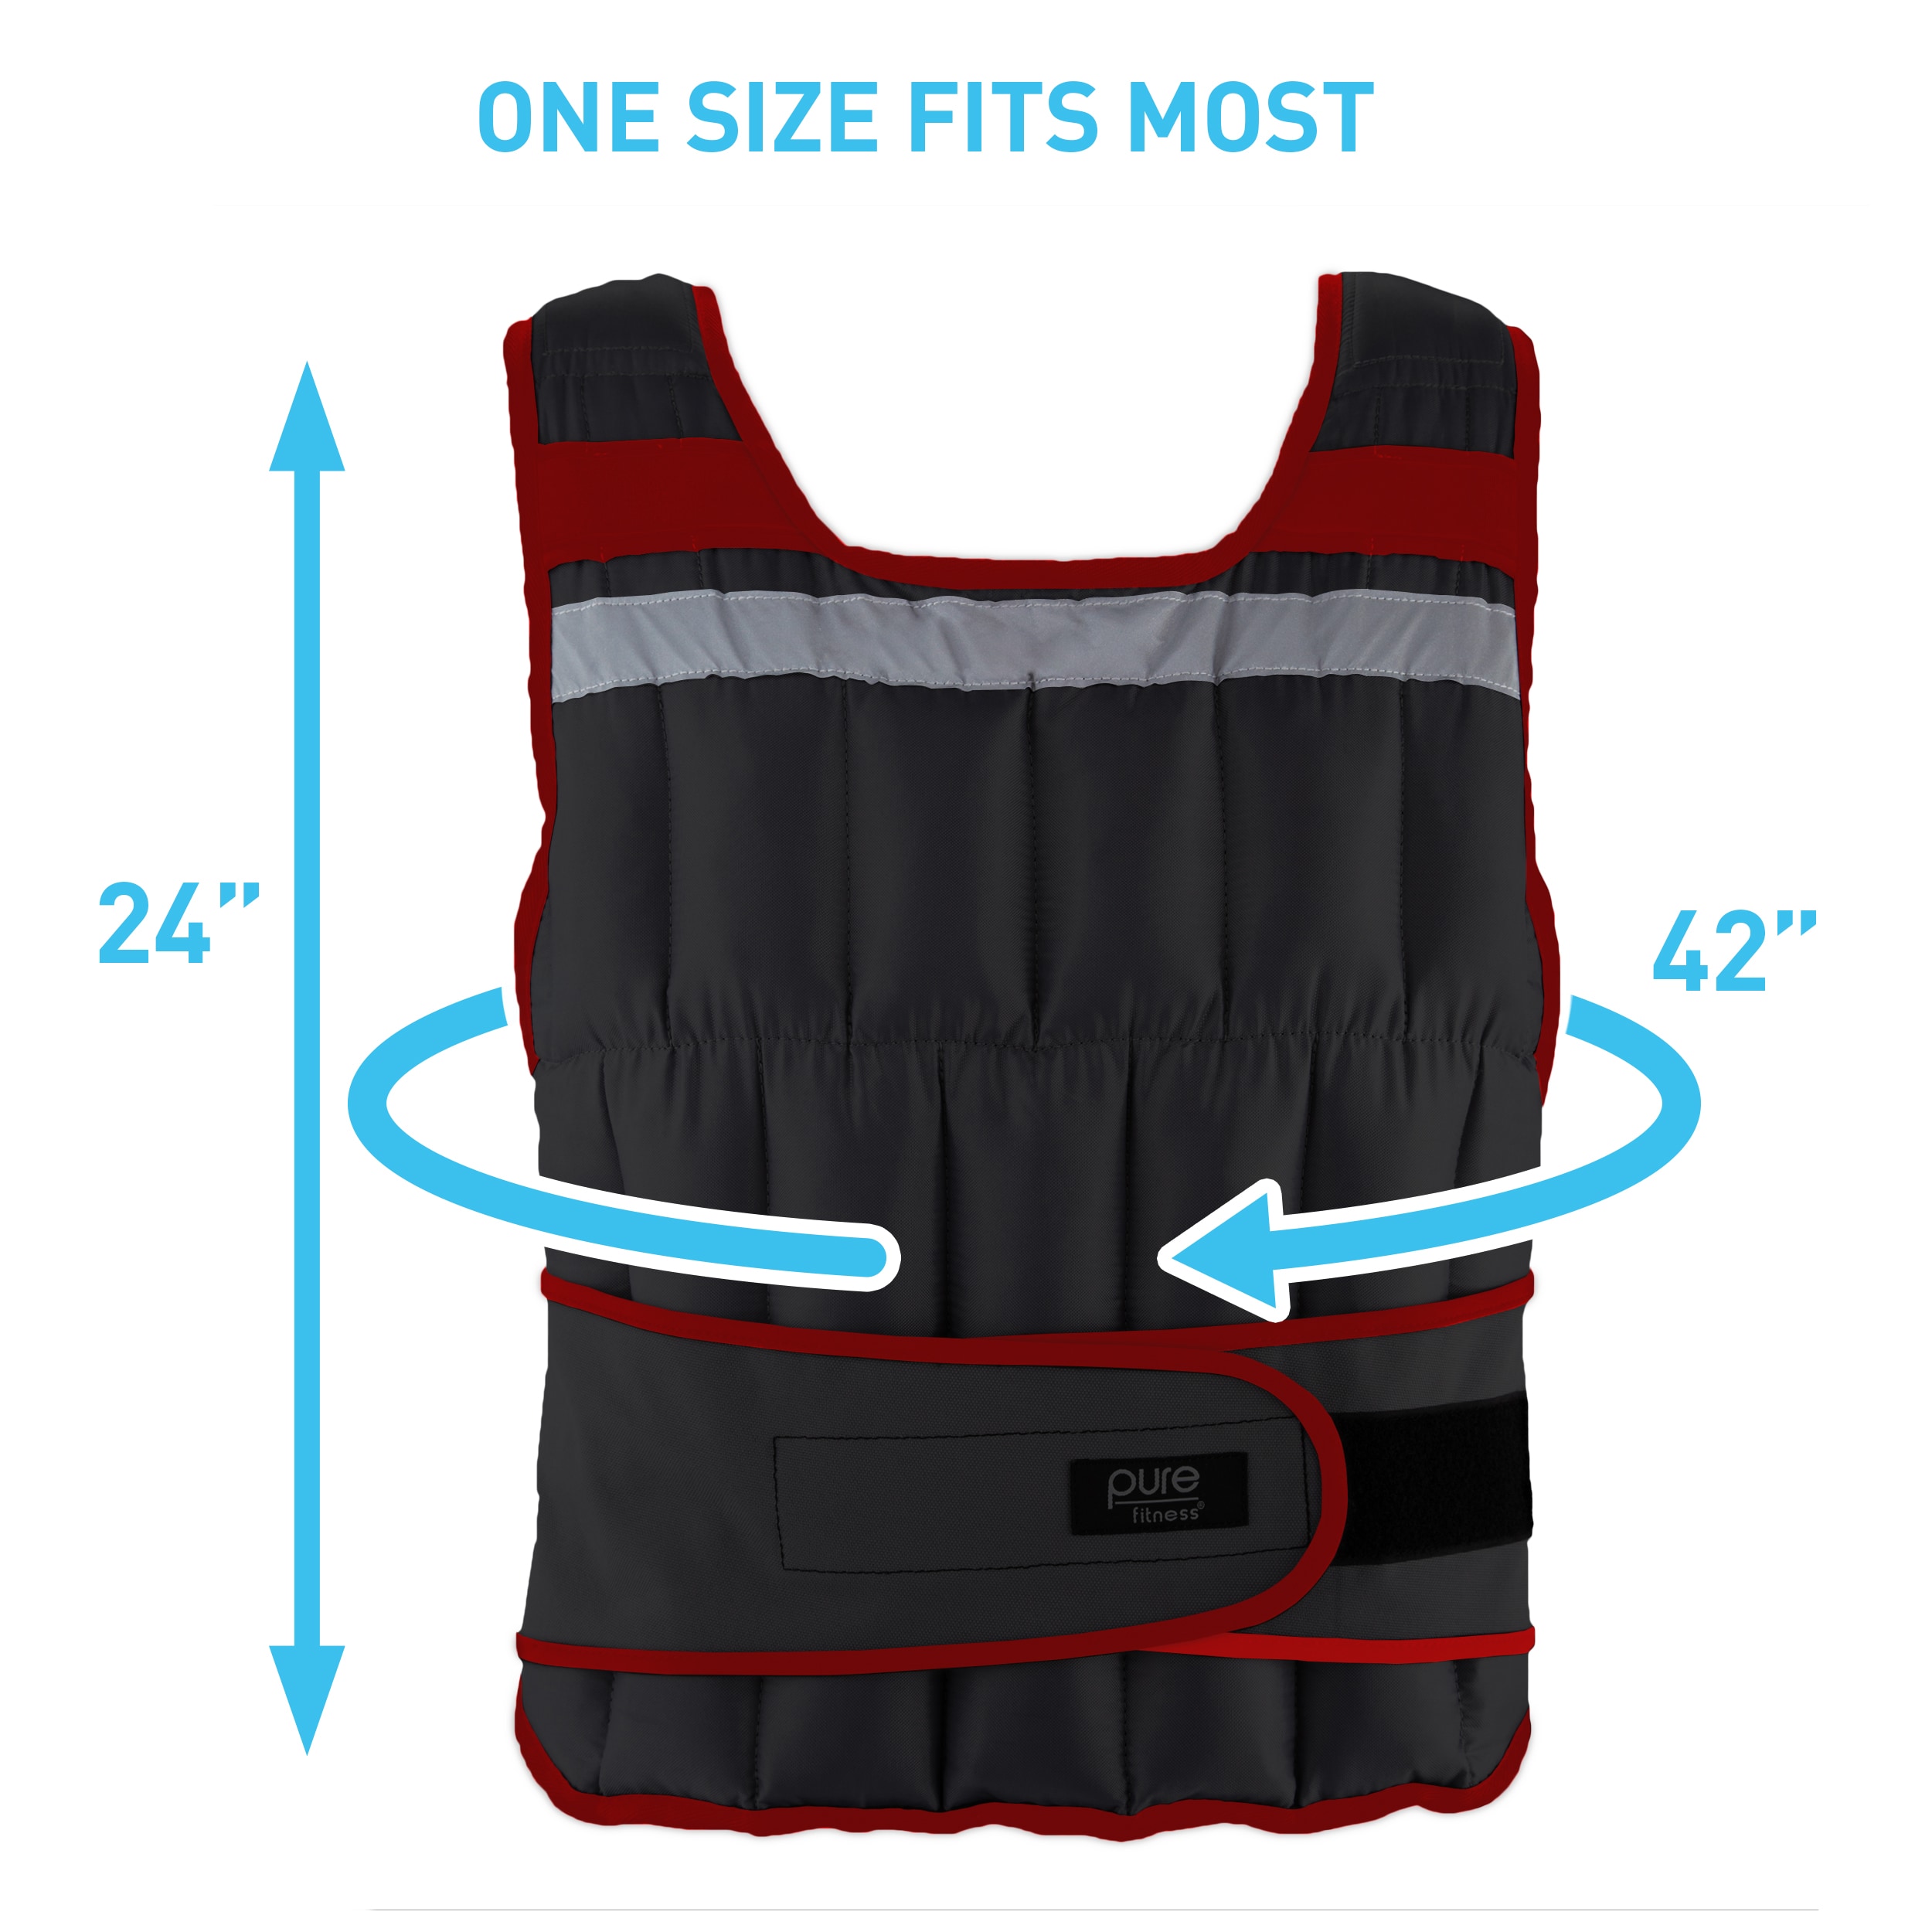 40 lb. Adjustable Weighted Vest